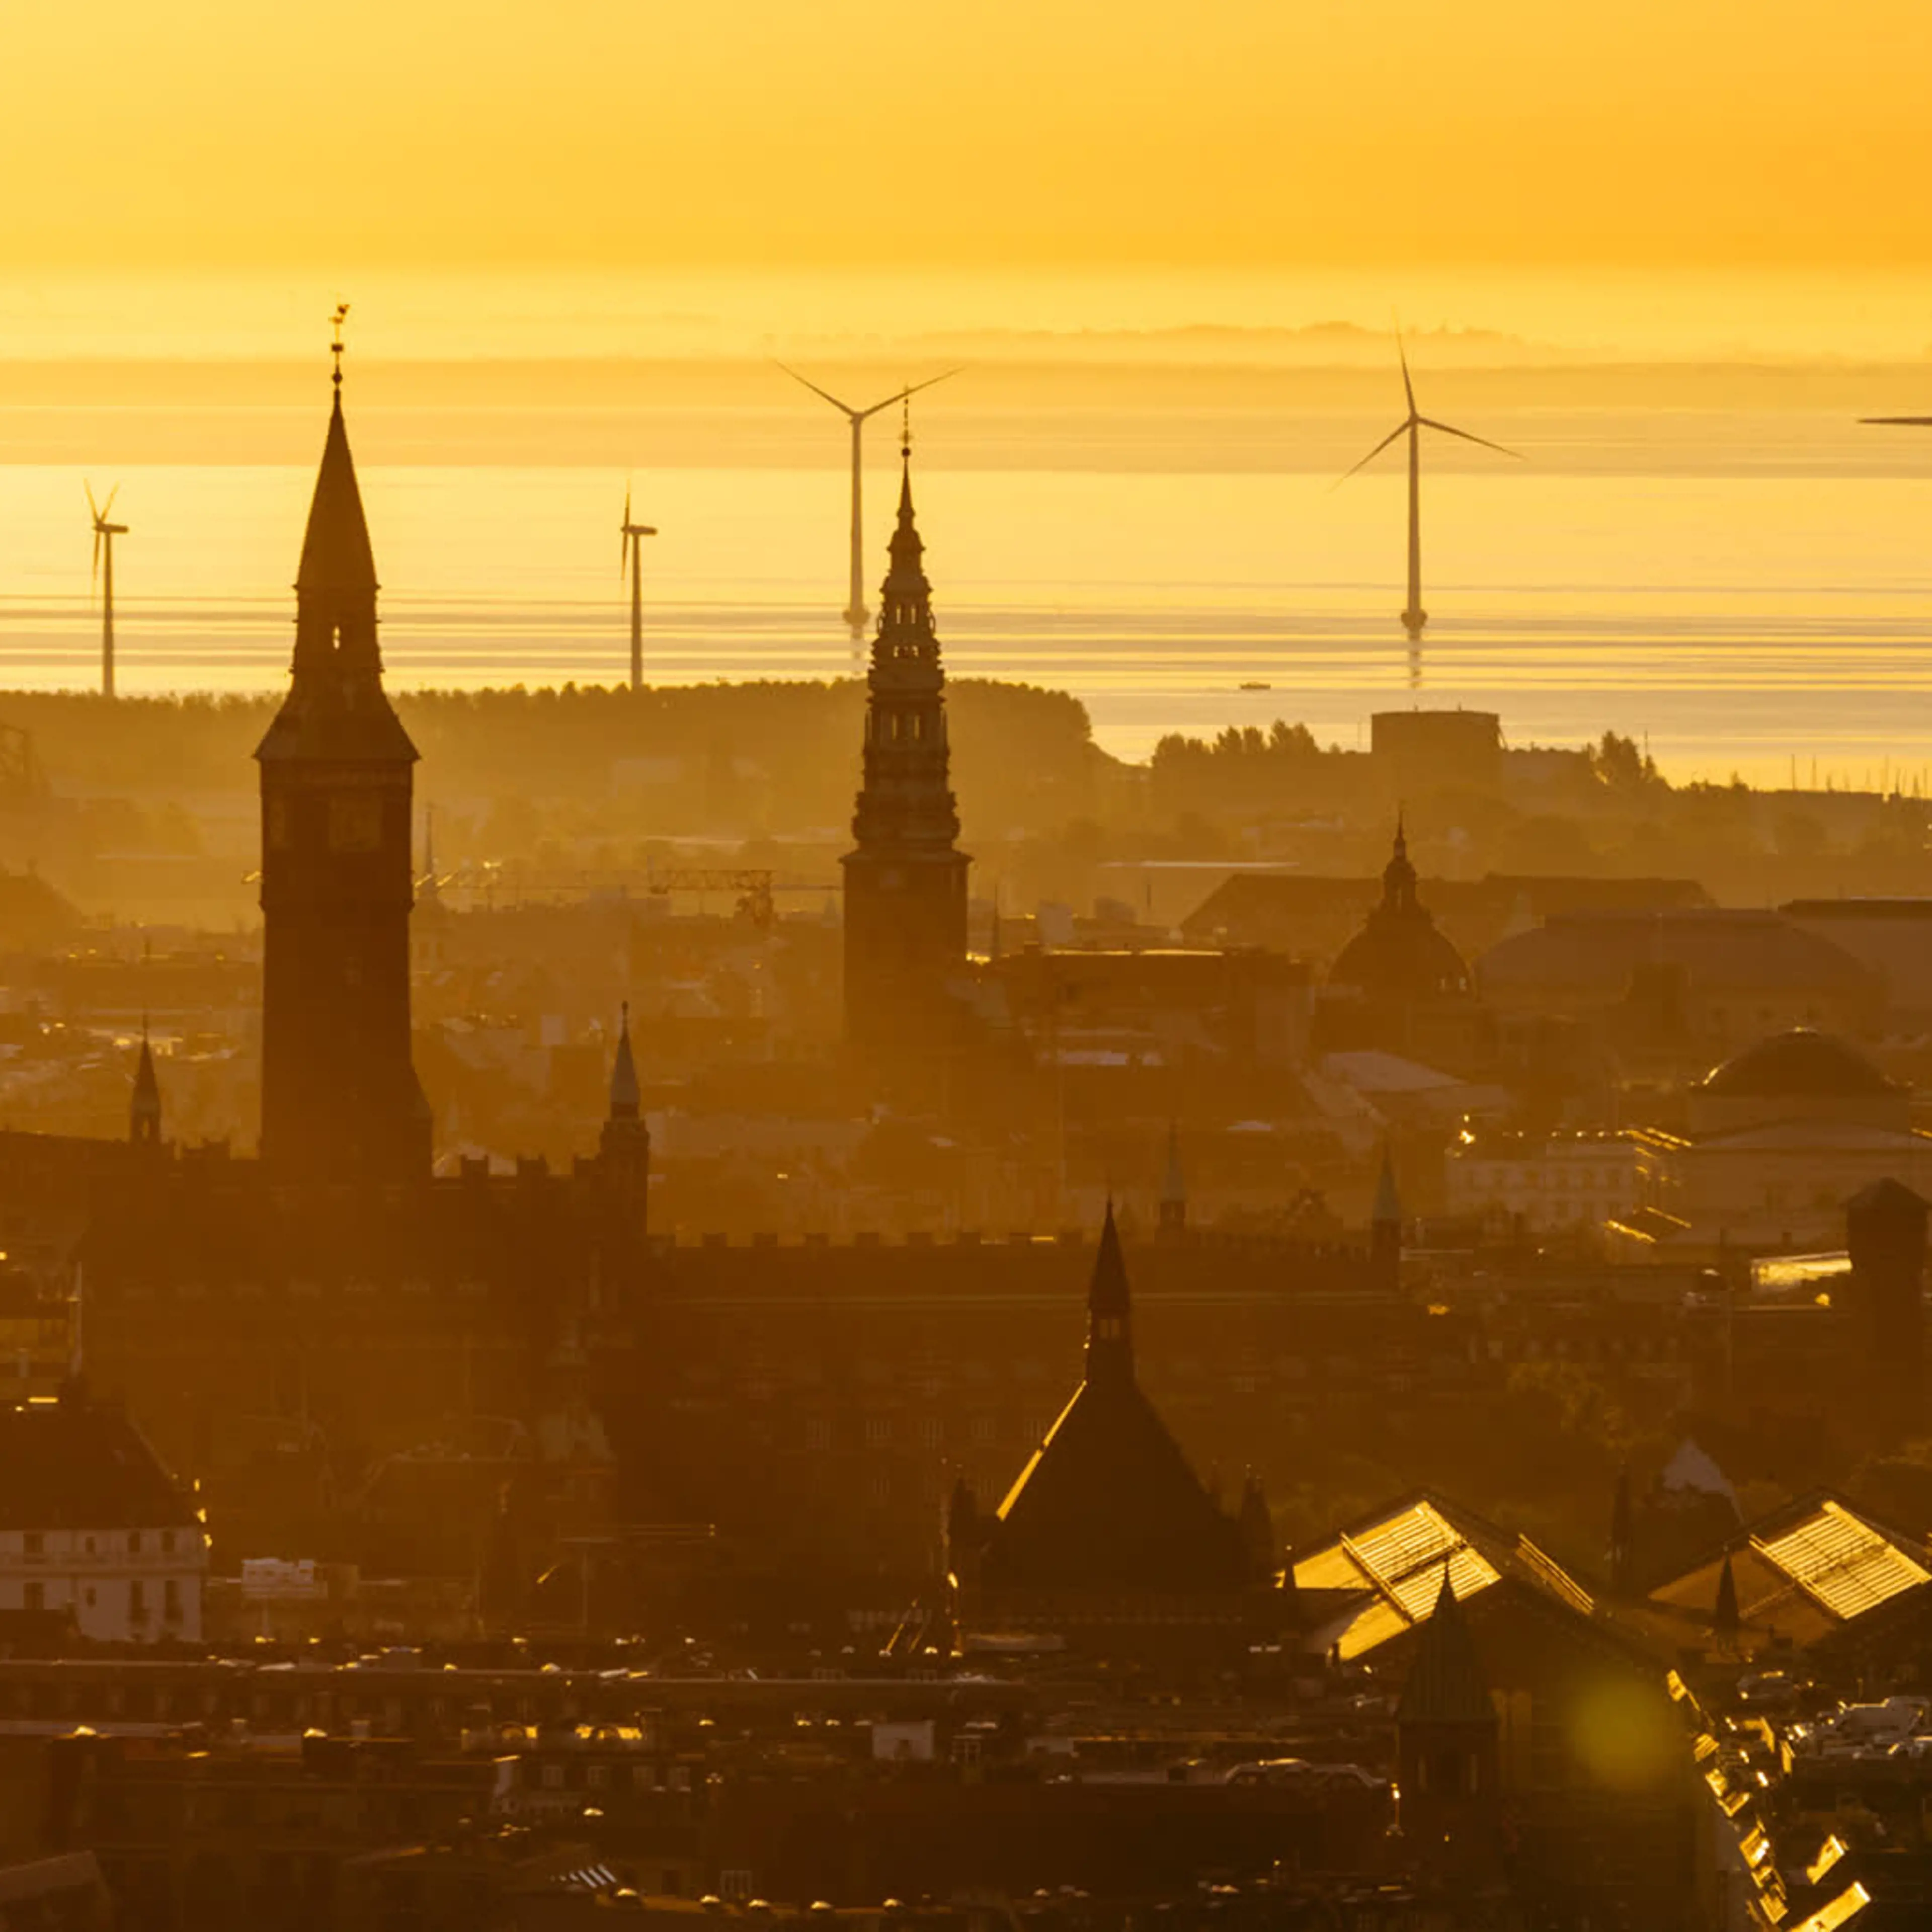 Skyline of Copenhagen at sunset with windmills in the background